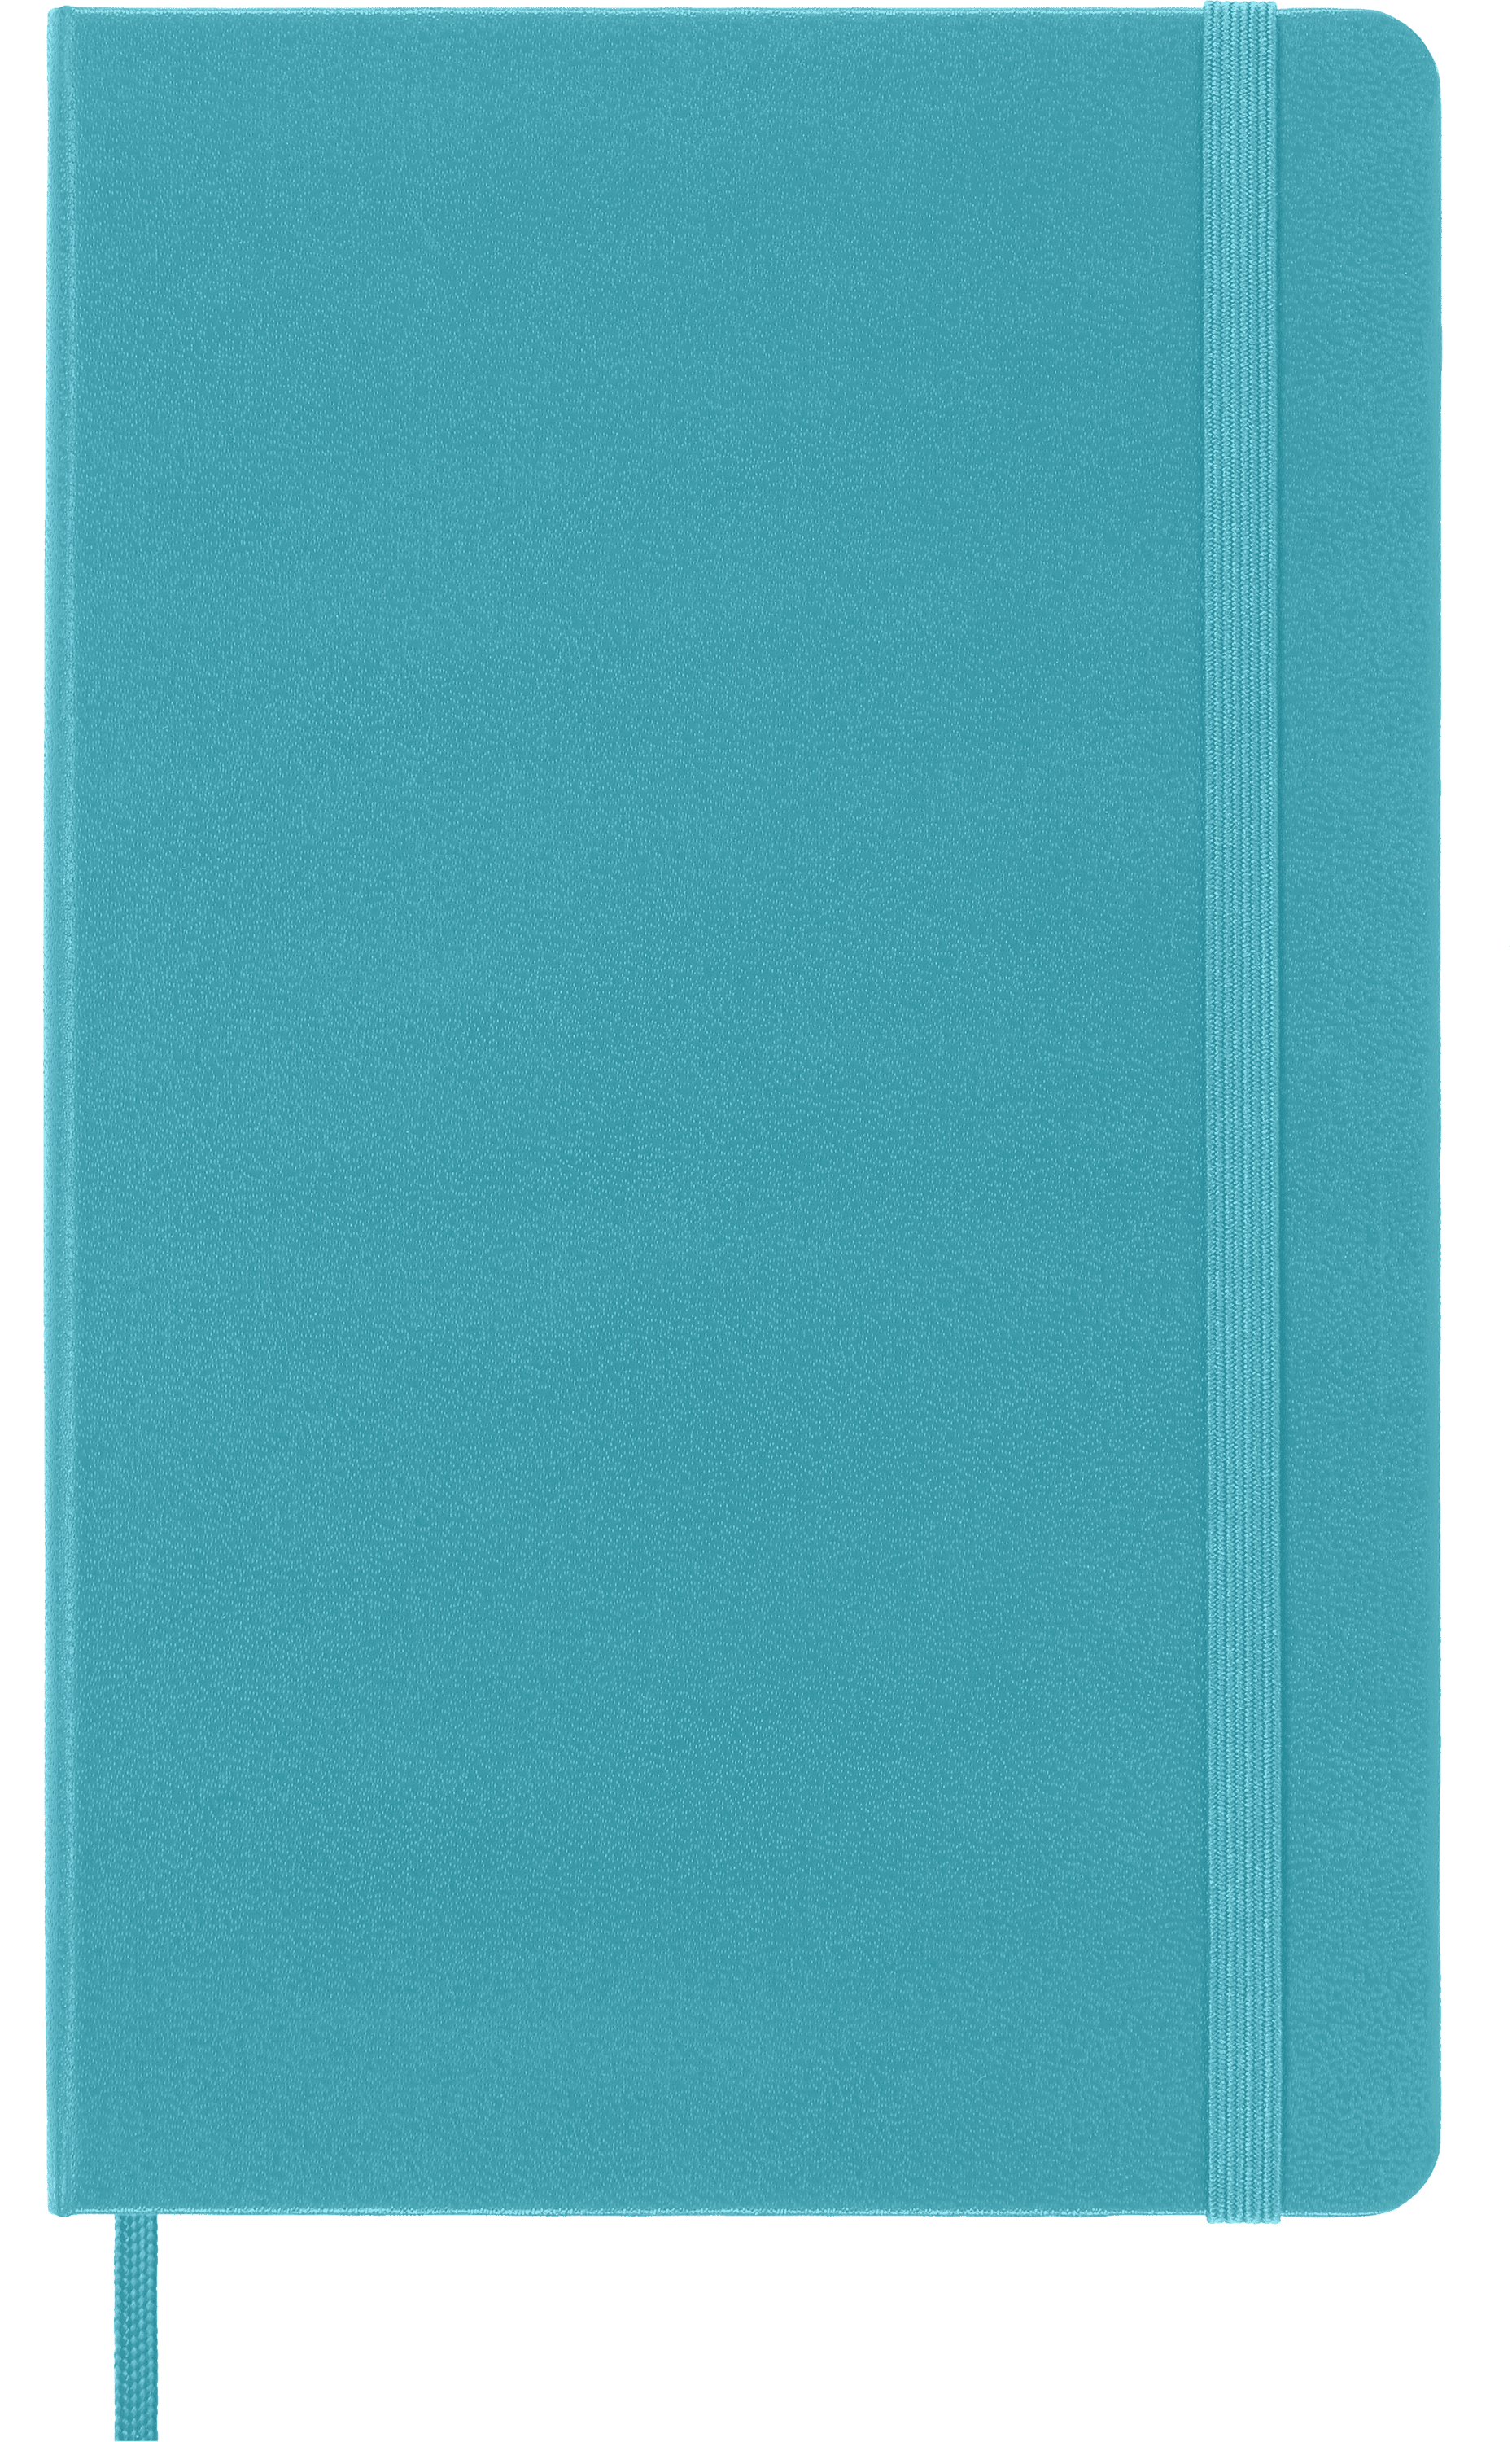 Moleskine Teal Hard Cover Ruled Notebook and Soft Cover Teal Ruled Notebook 